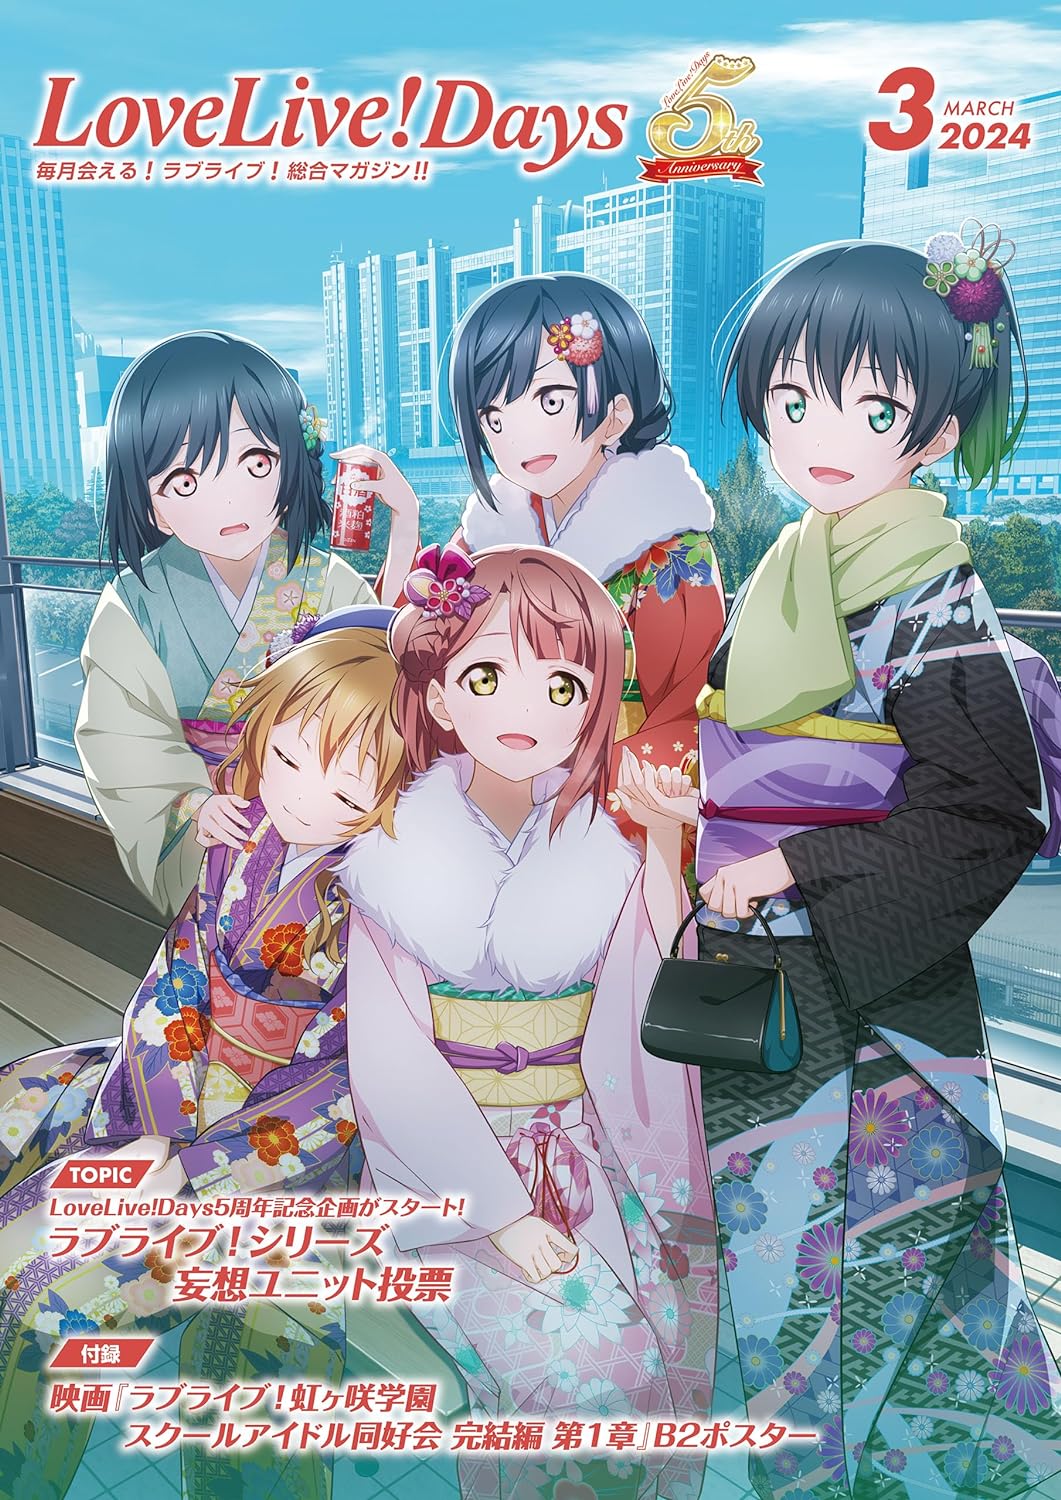 LoveLive!Days March 2024